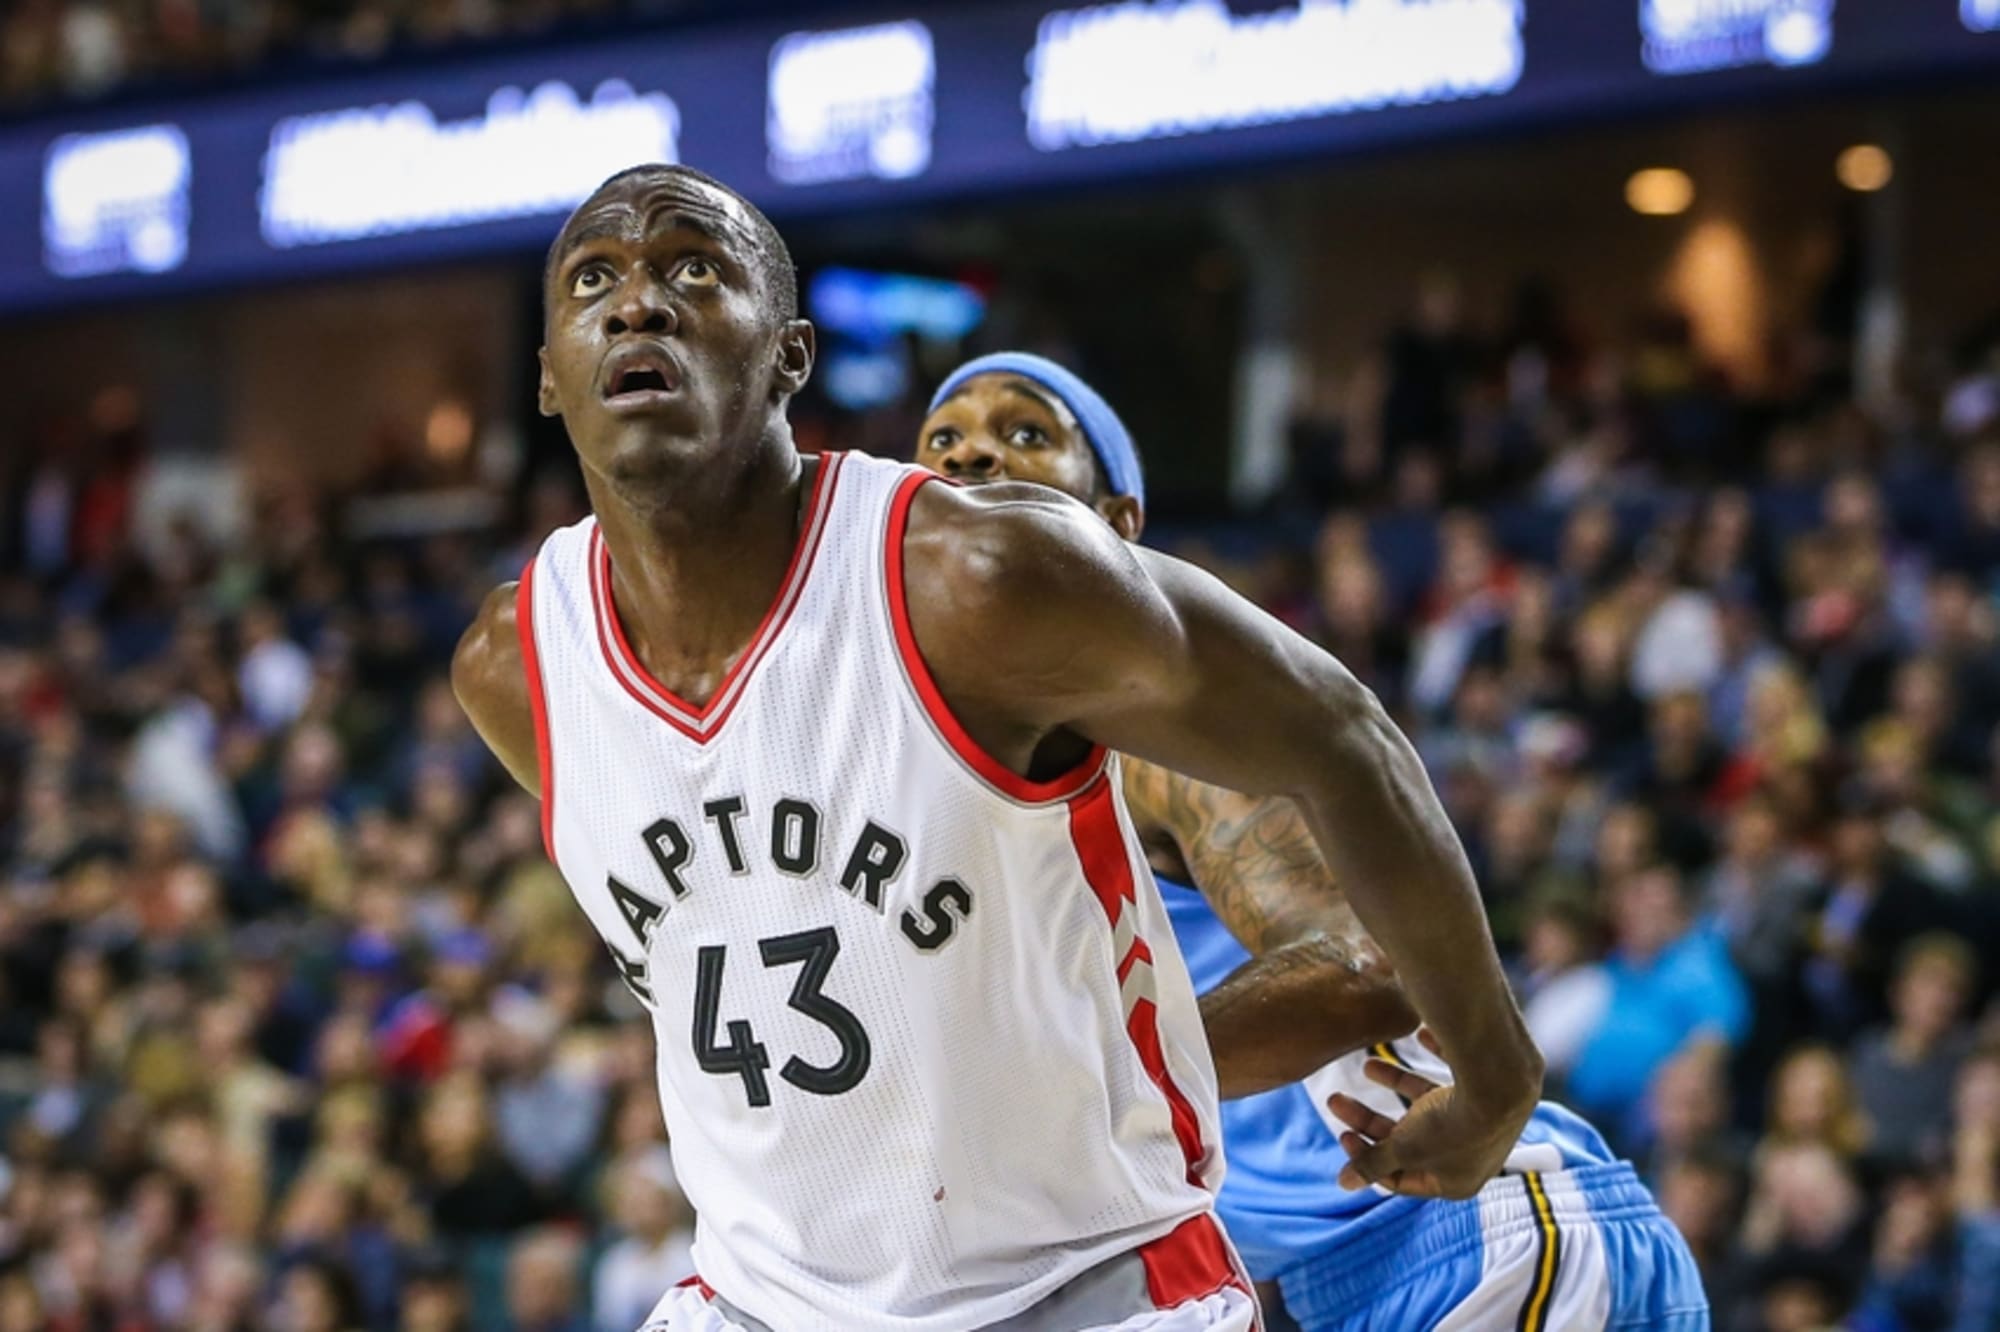 The Pascal Siakam story a great one at so many different levels